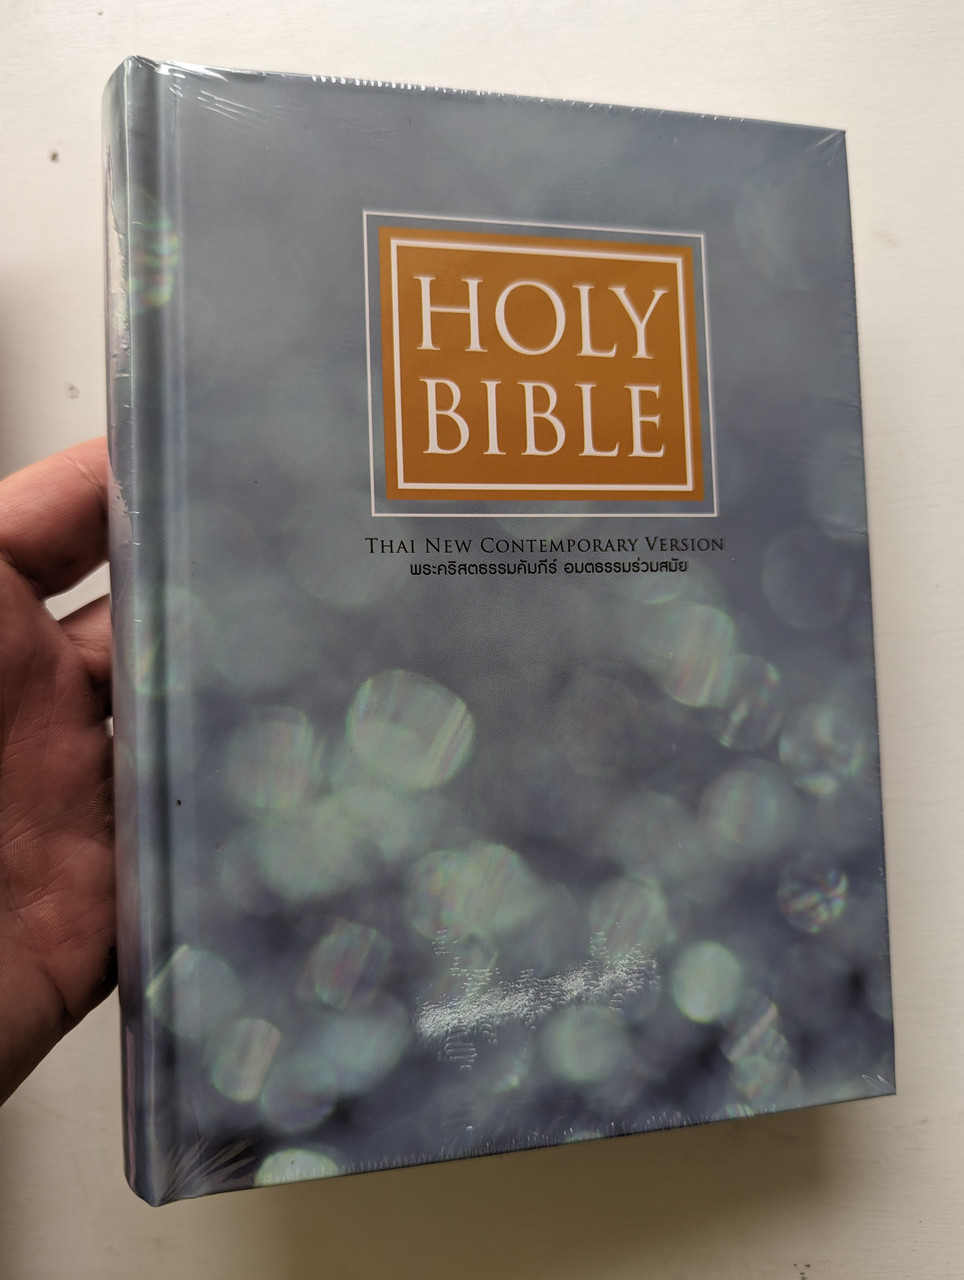 https://cdn10.bigcommerce.com/s-62bdpkt7pb/products/4904/images/311836/Thai_Holy_Bible_-_Thai_New_Contemporary_Version_TNCV_Color_Maps_1__78617.1699811763.1280.1280.jpg?c=2